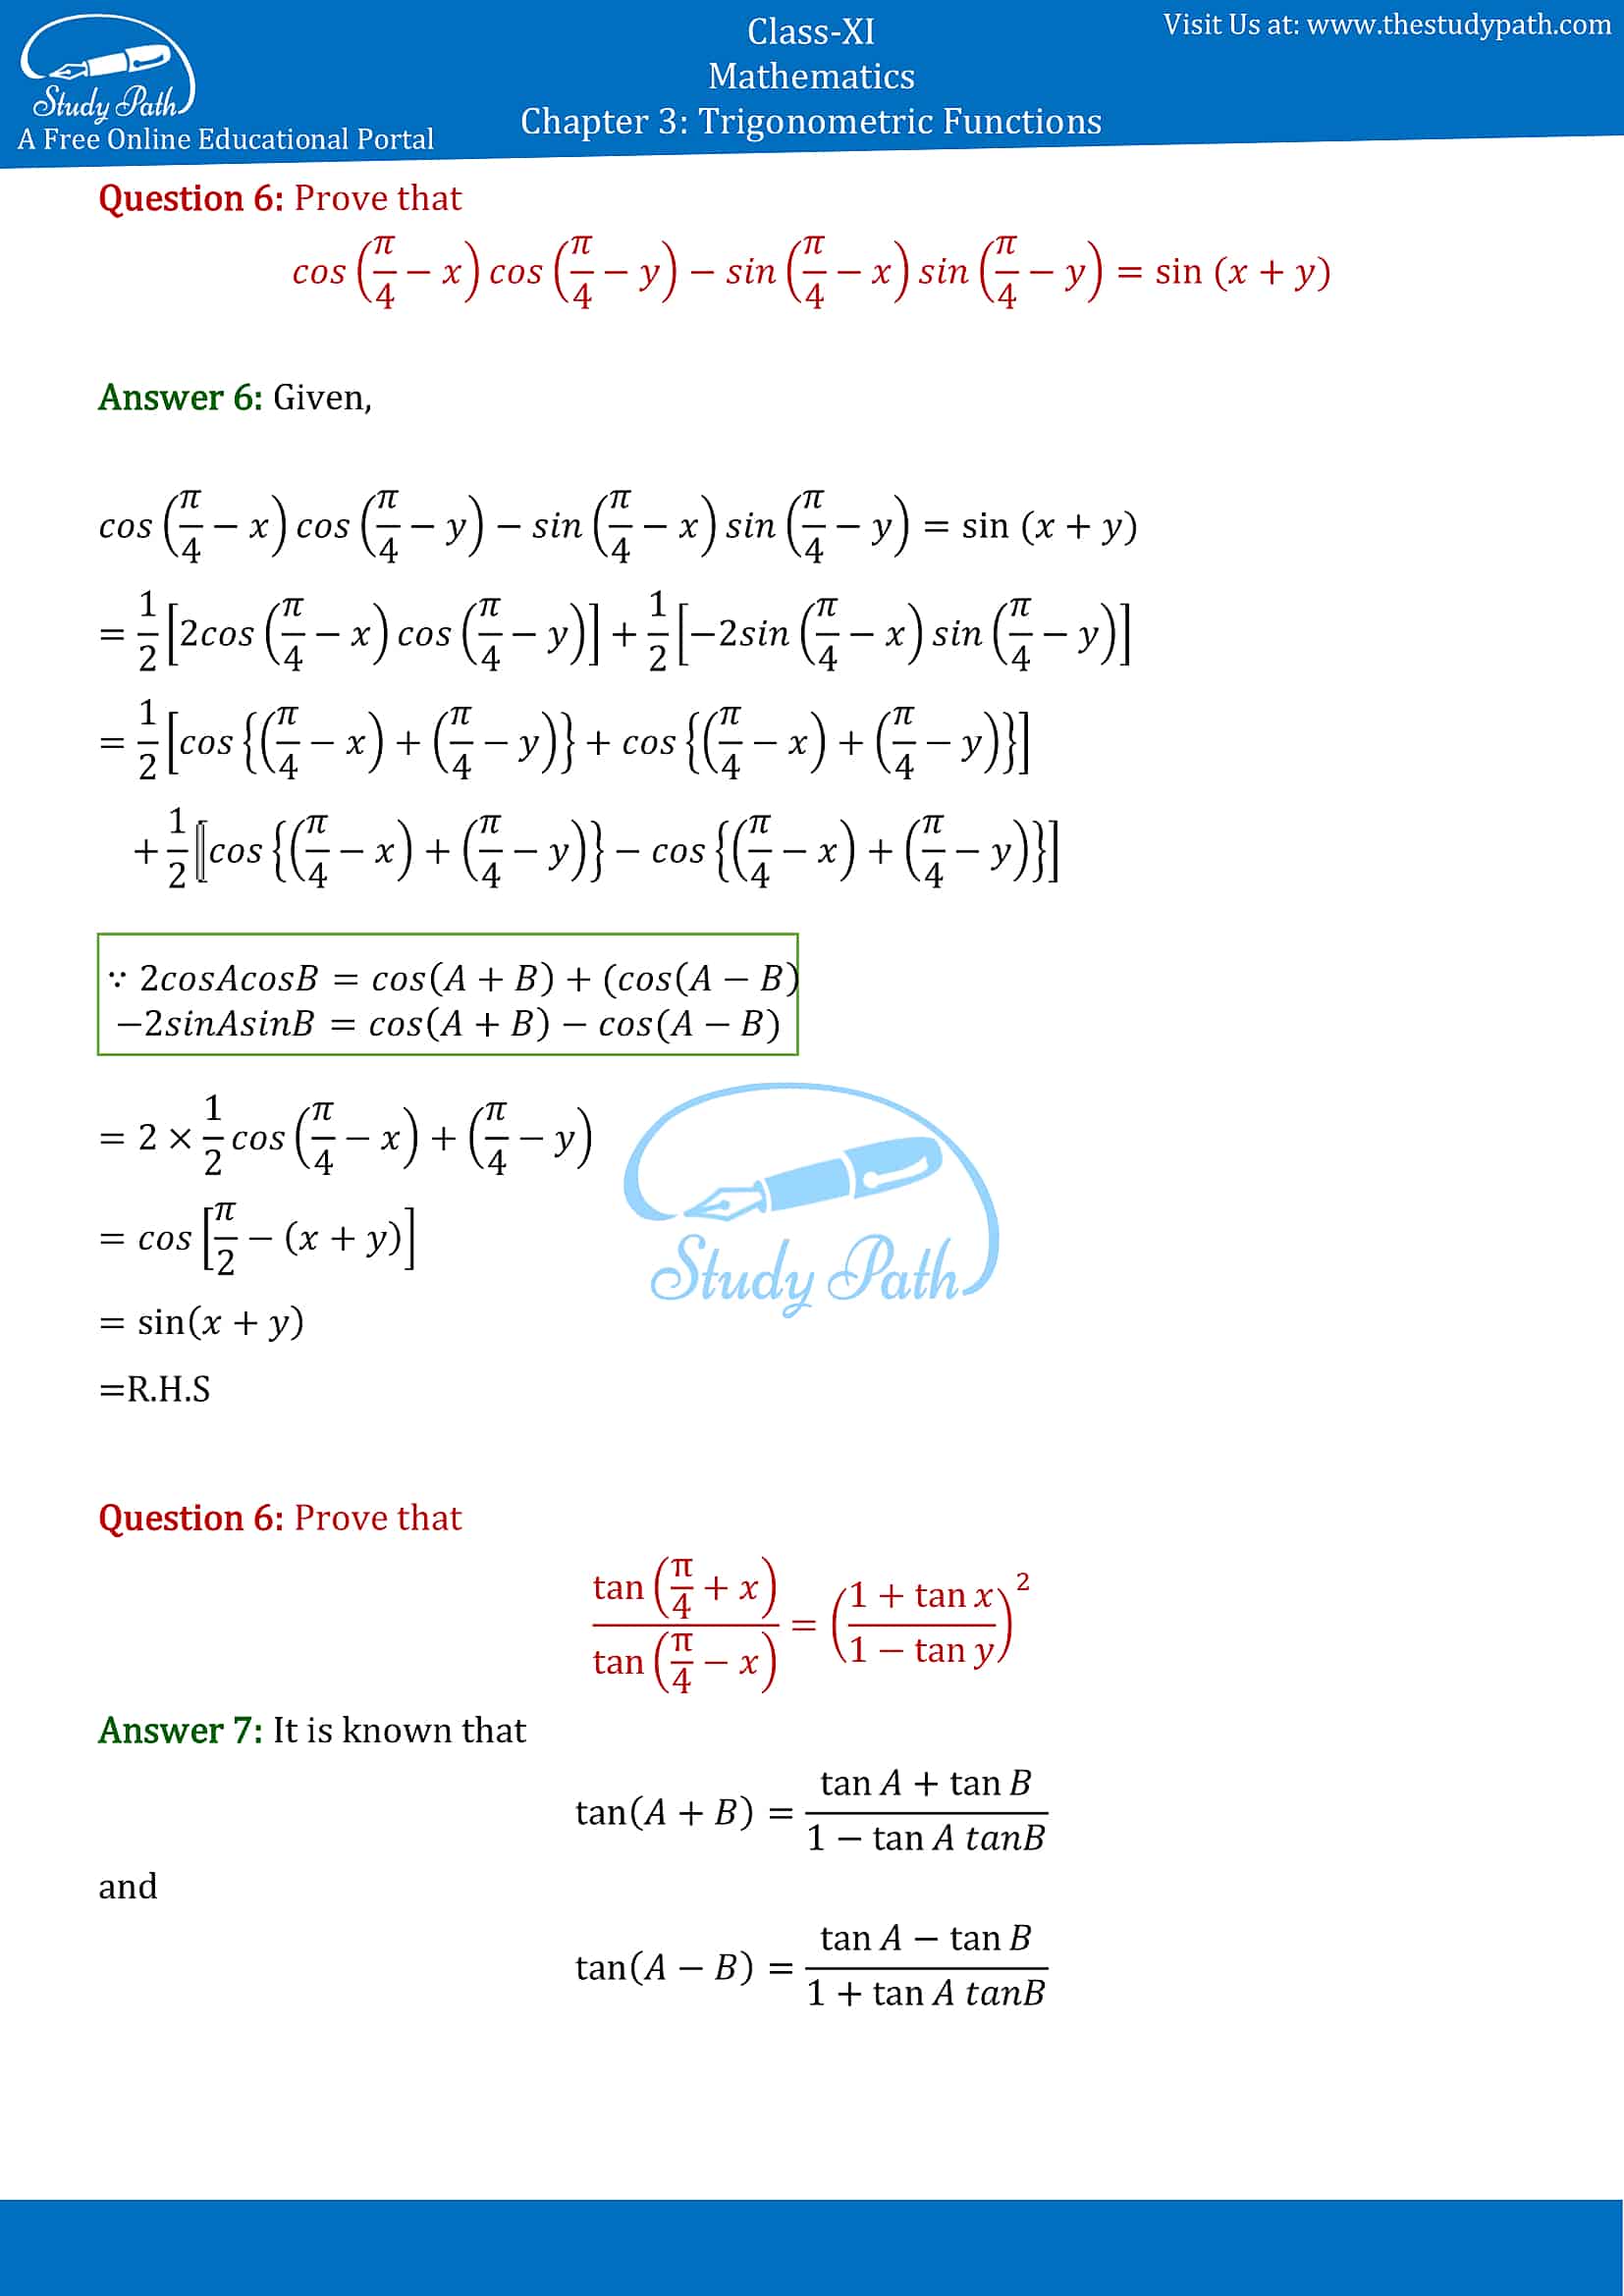 NCERT Solutions for Class 11 Maths Chapter 3 Trigonometric Functions Exercise 3.3